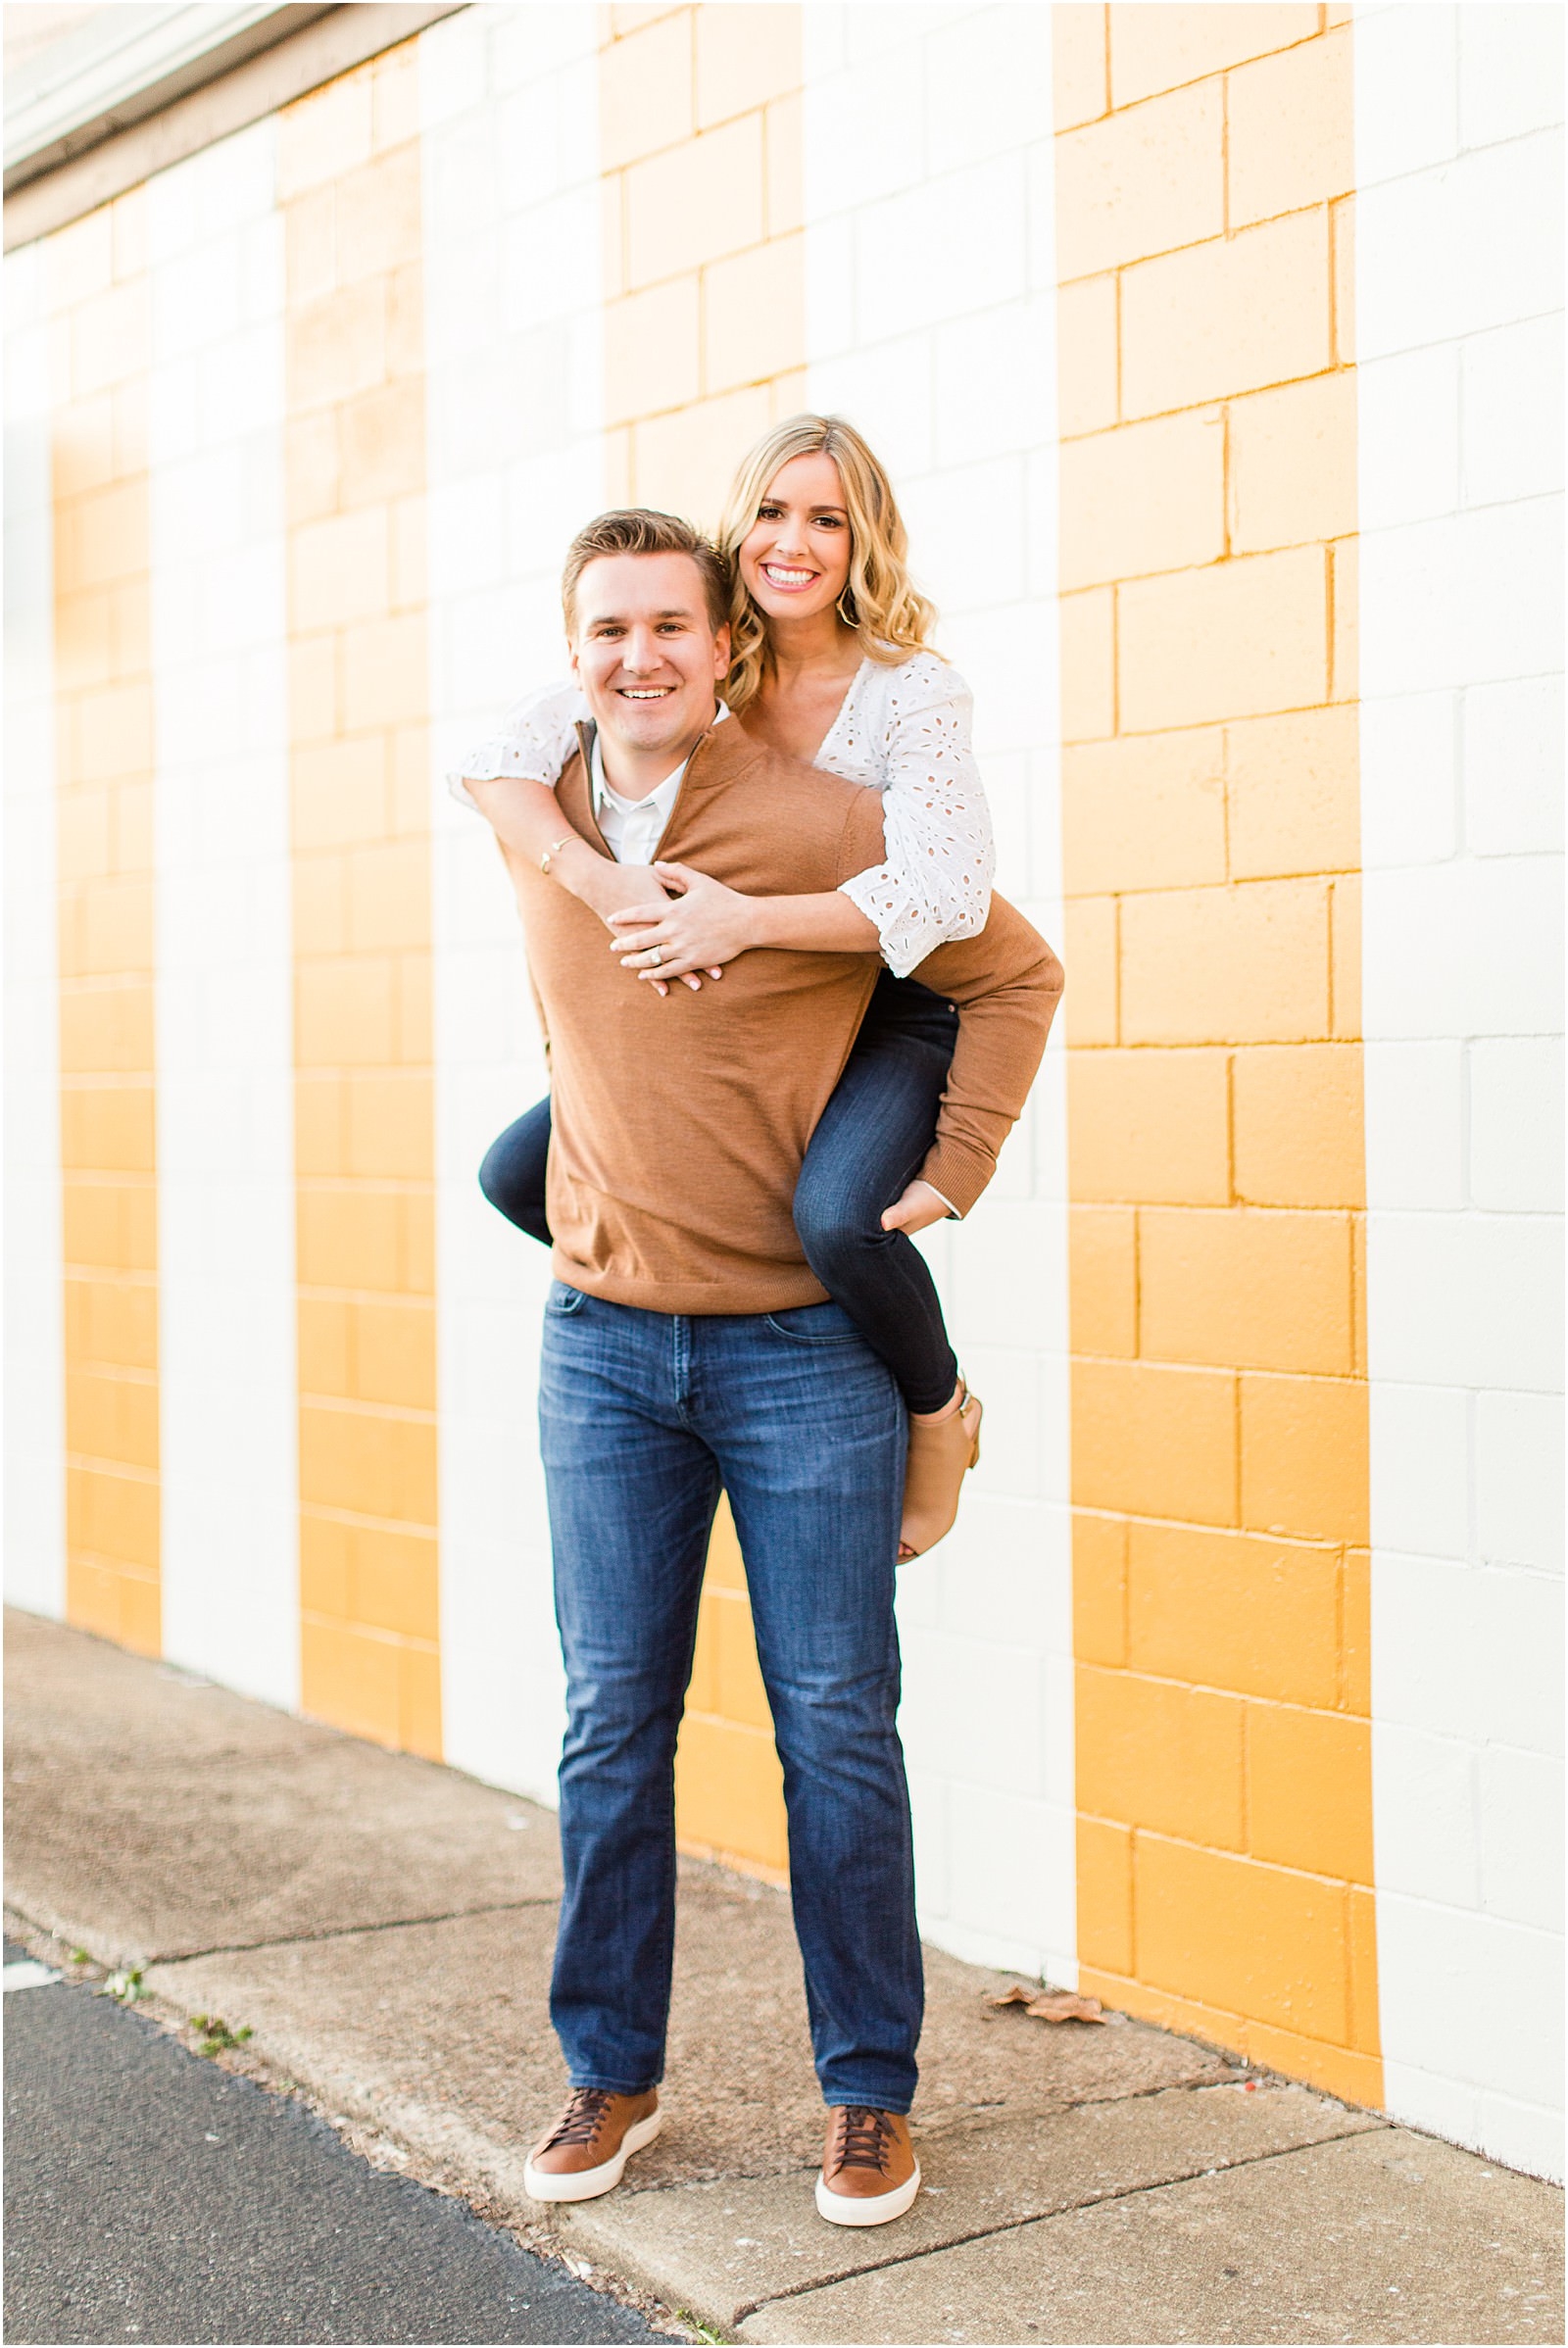 Madison and Christaan | A 20 West Engagement Session in Downto wn Newburgh | Bret and Brandie Photography037.jpg